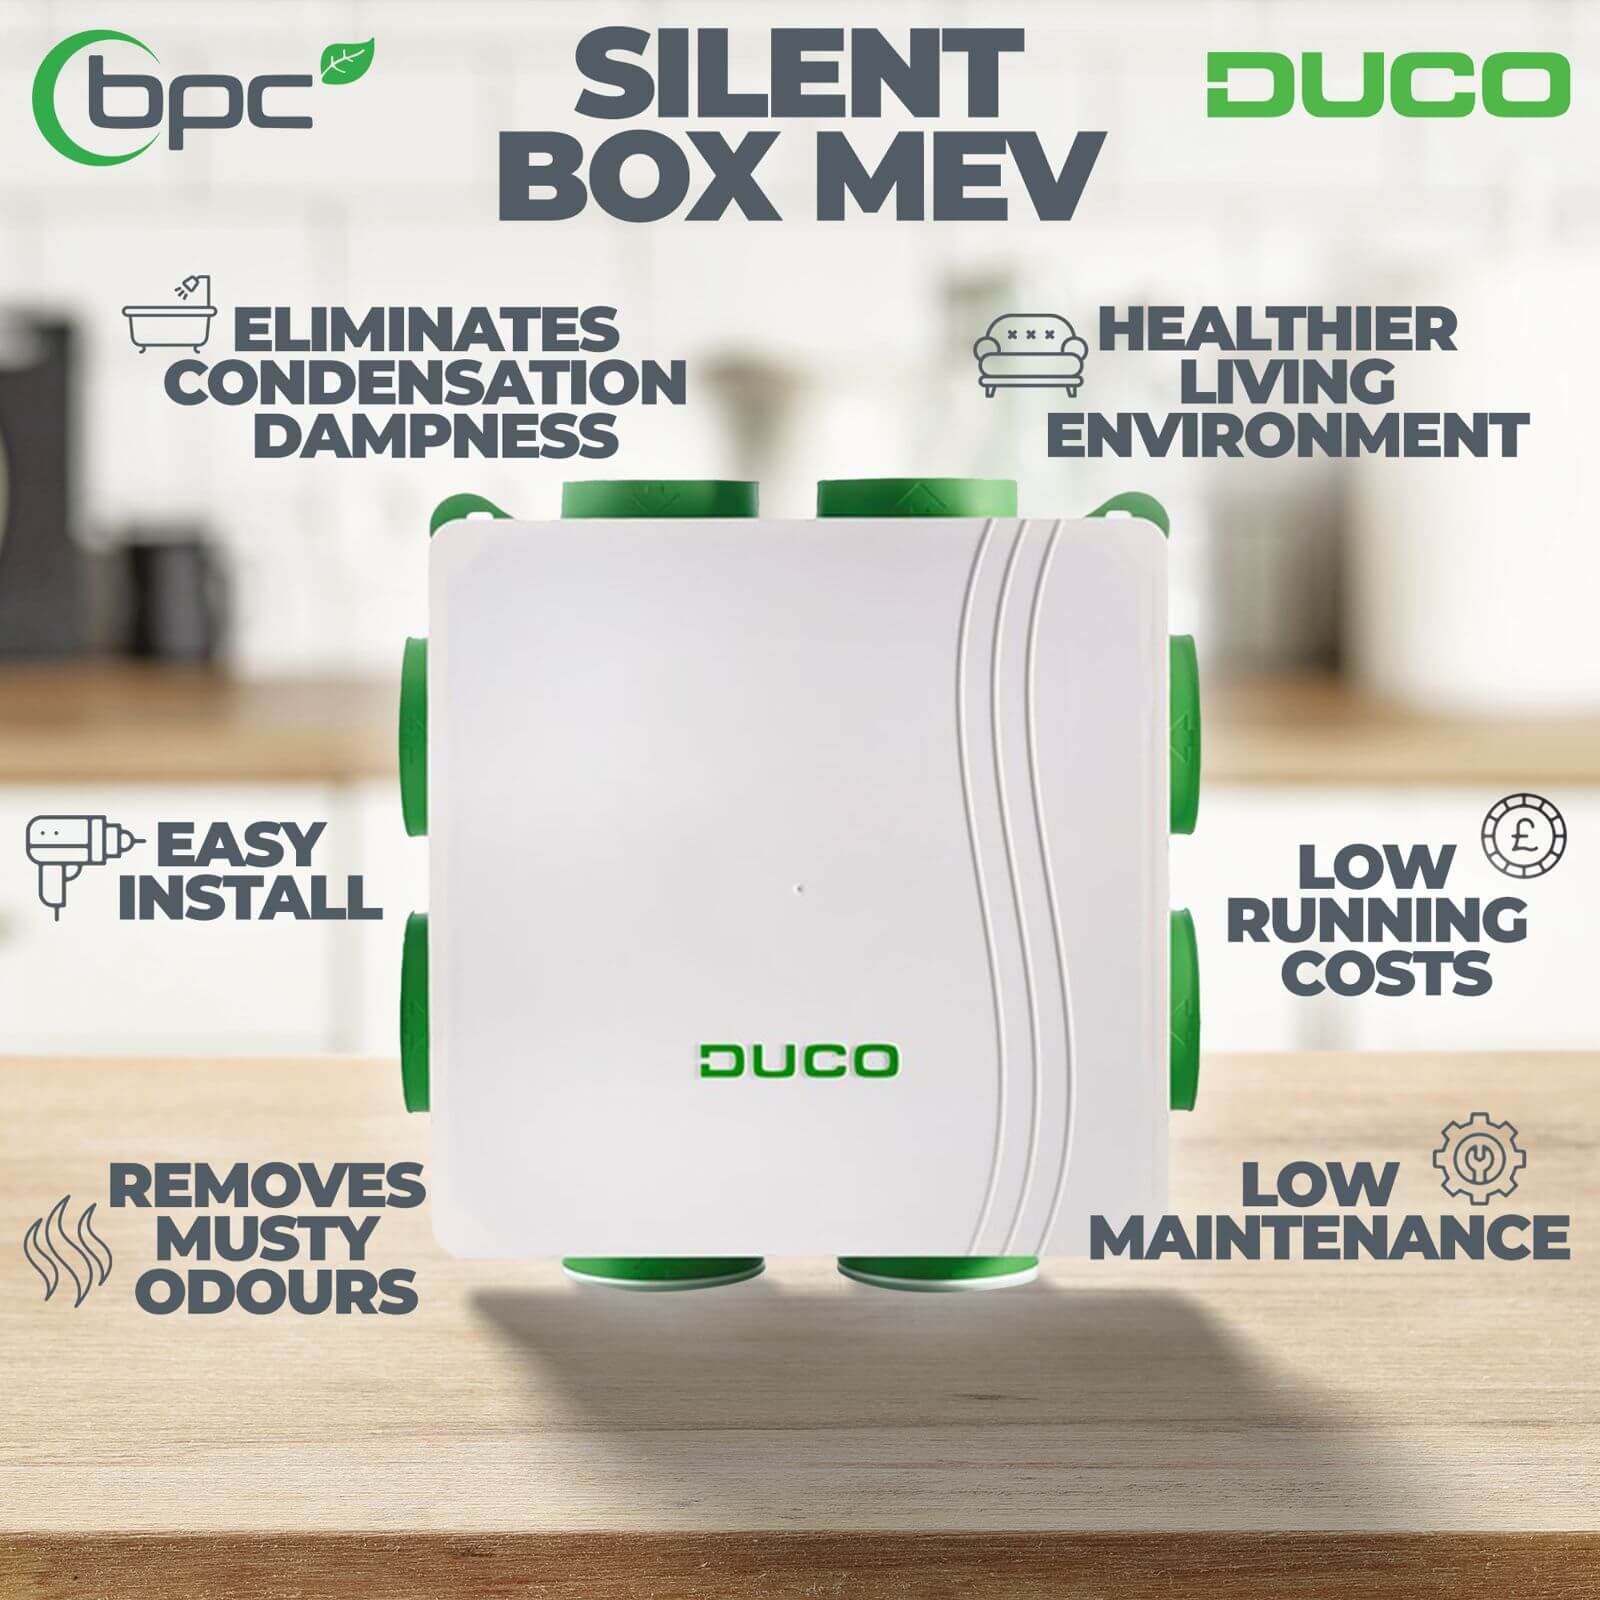 Why Choose The Duco MEV Silent Box?